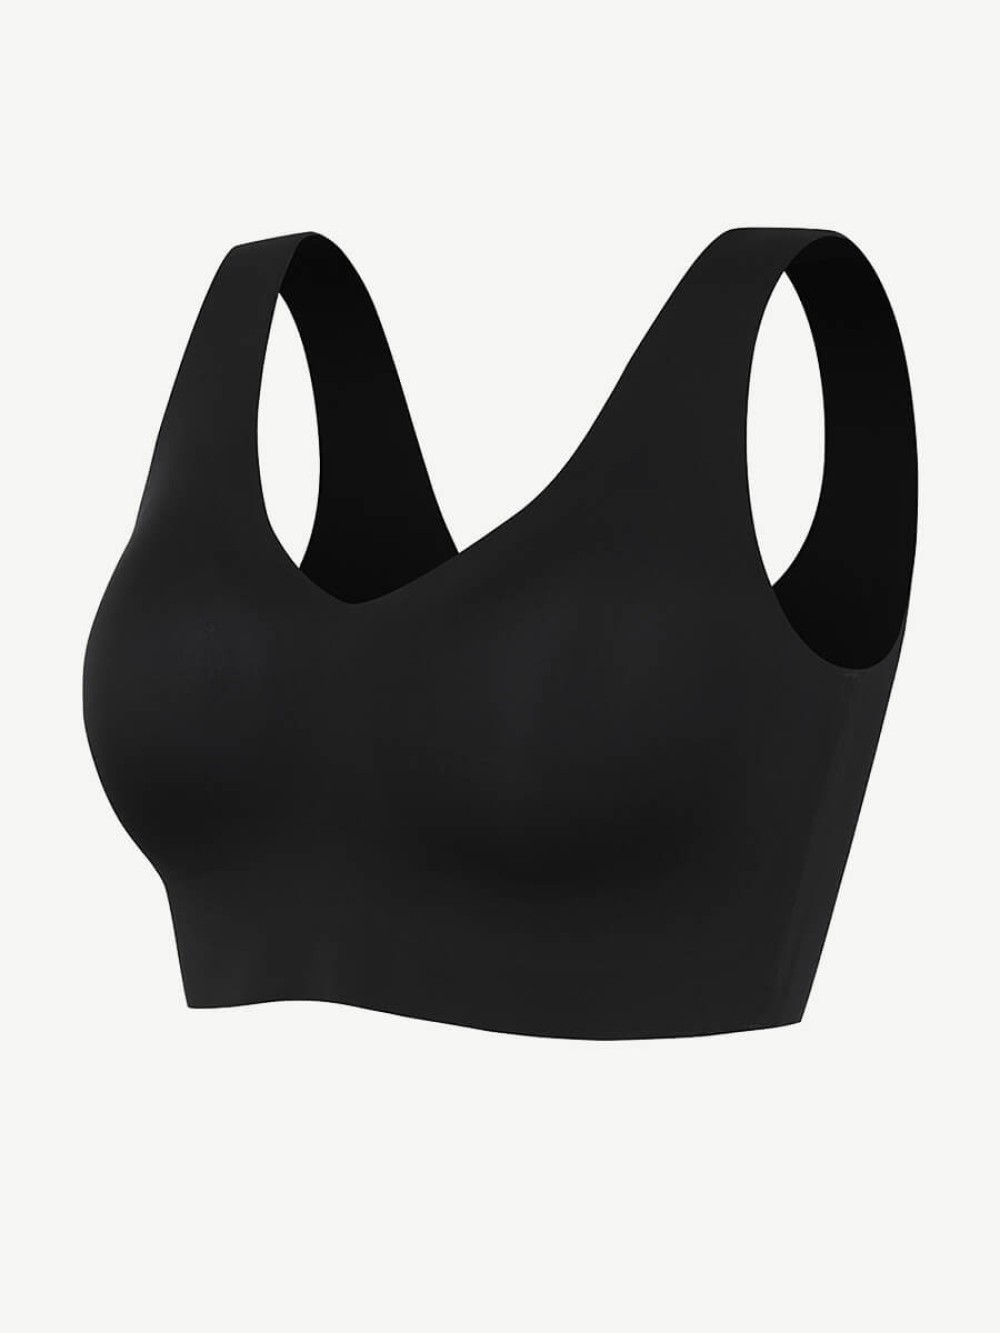 New Fashion Fitted V-Neck Seamless Bra Tank Top